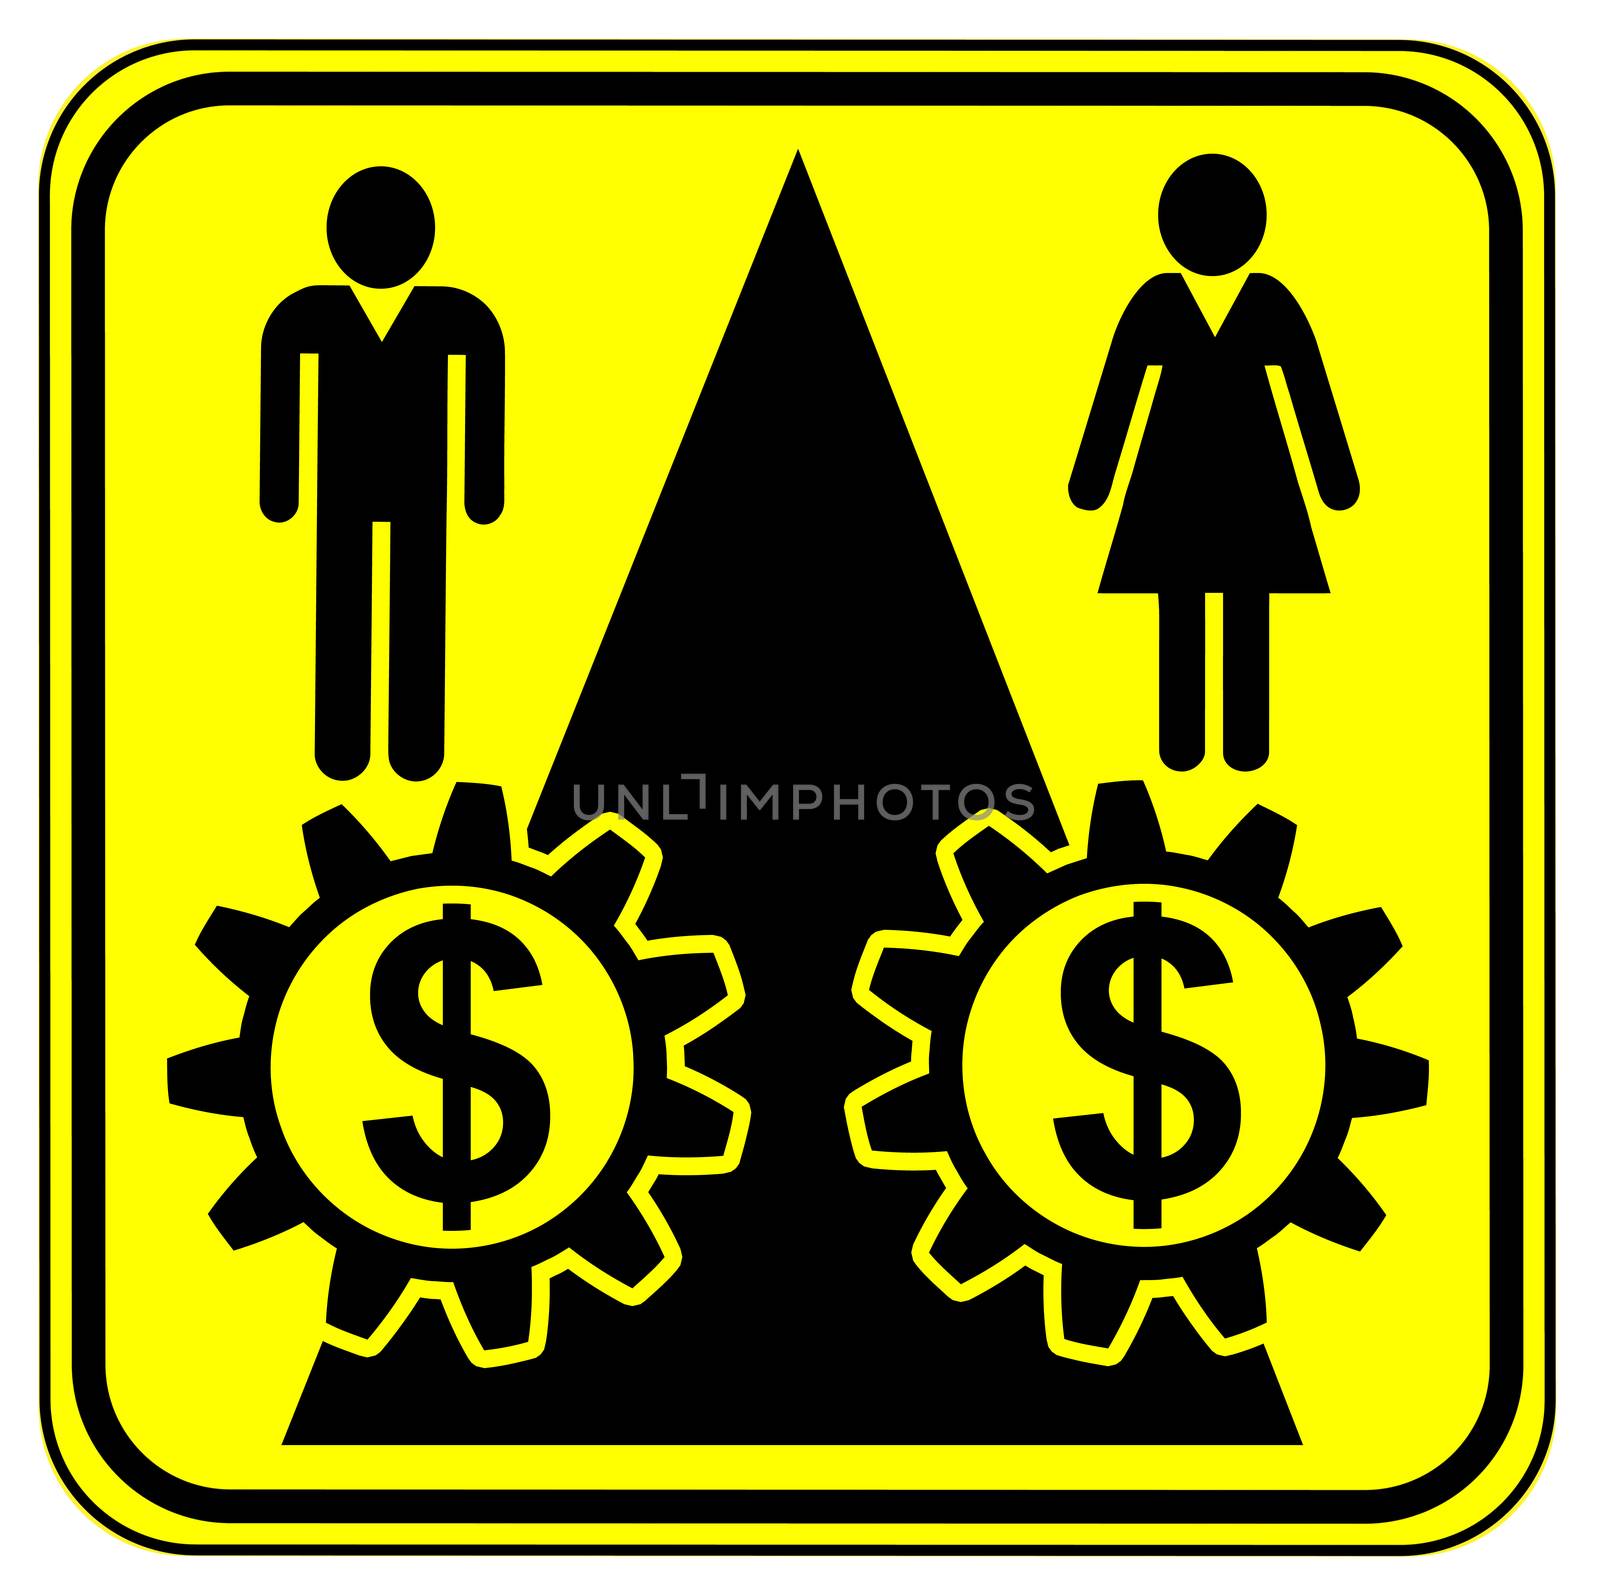 Concept sign for equal pay for equal work especially for women